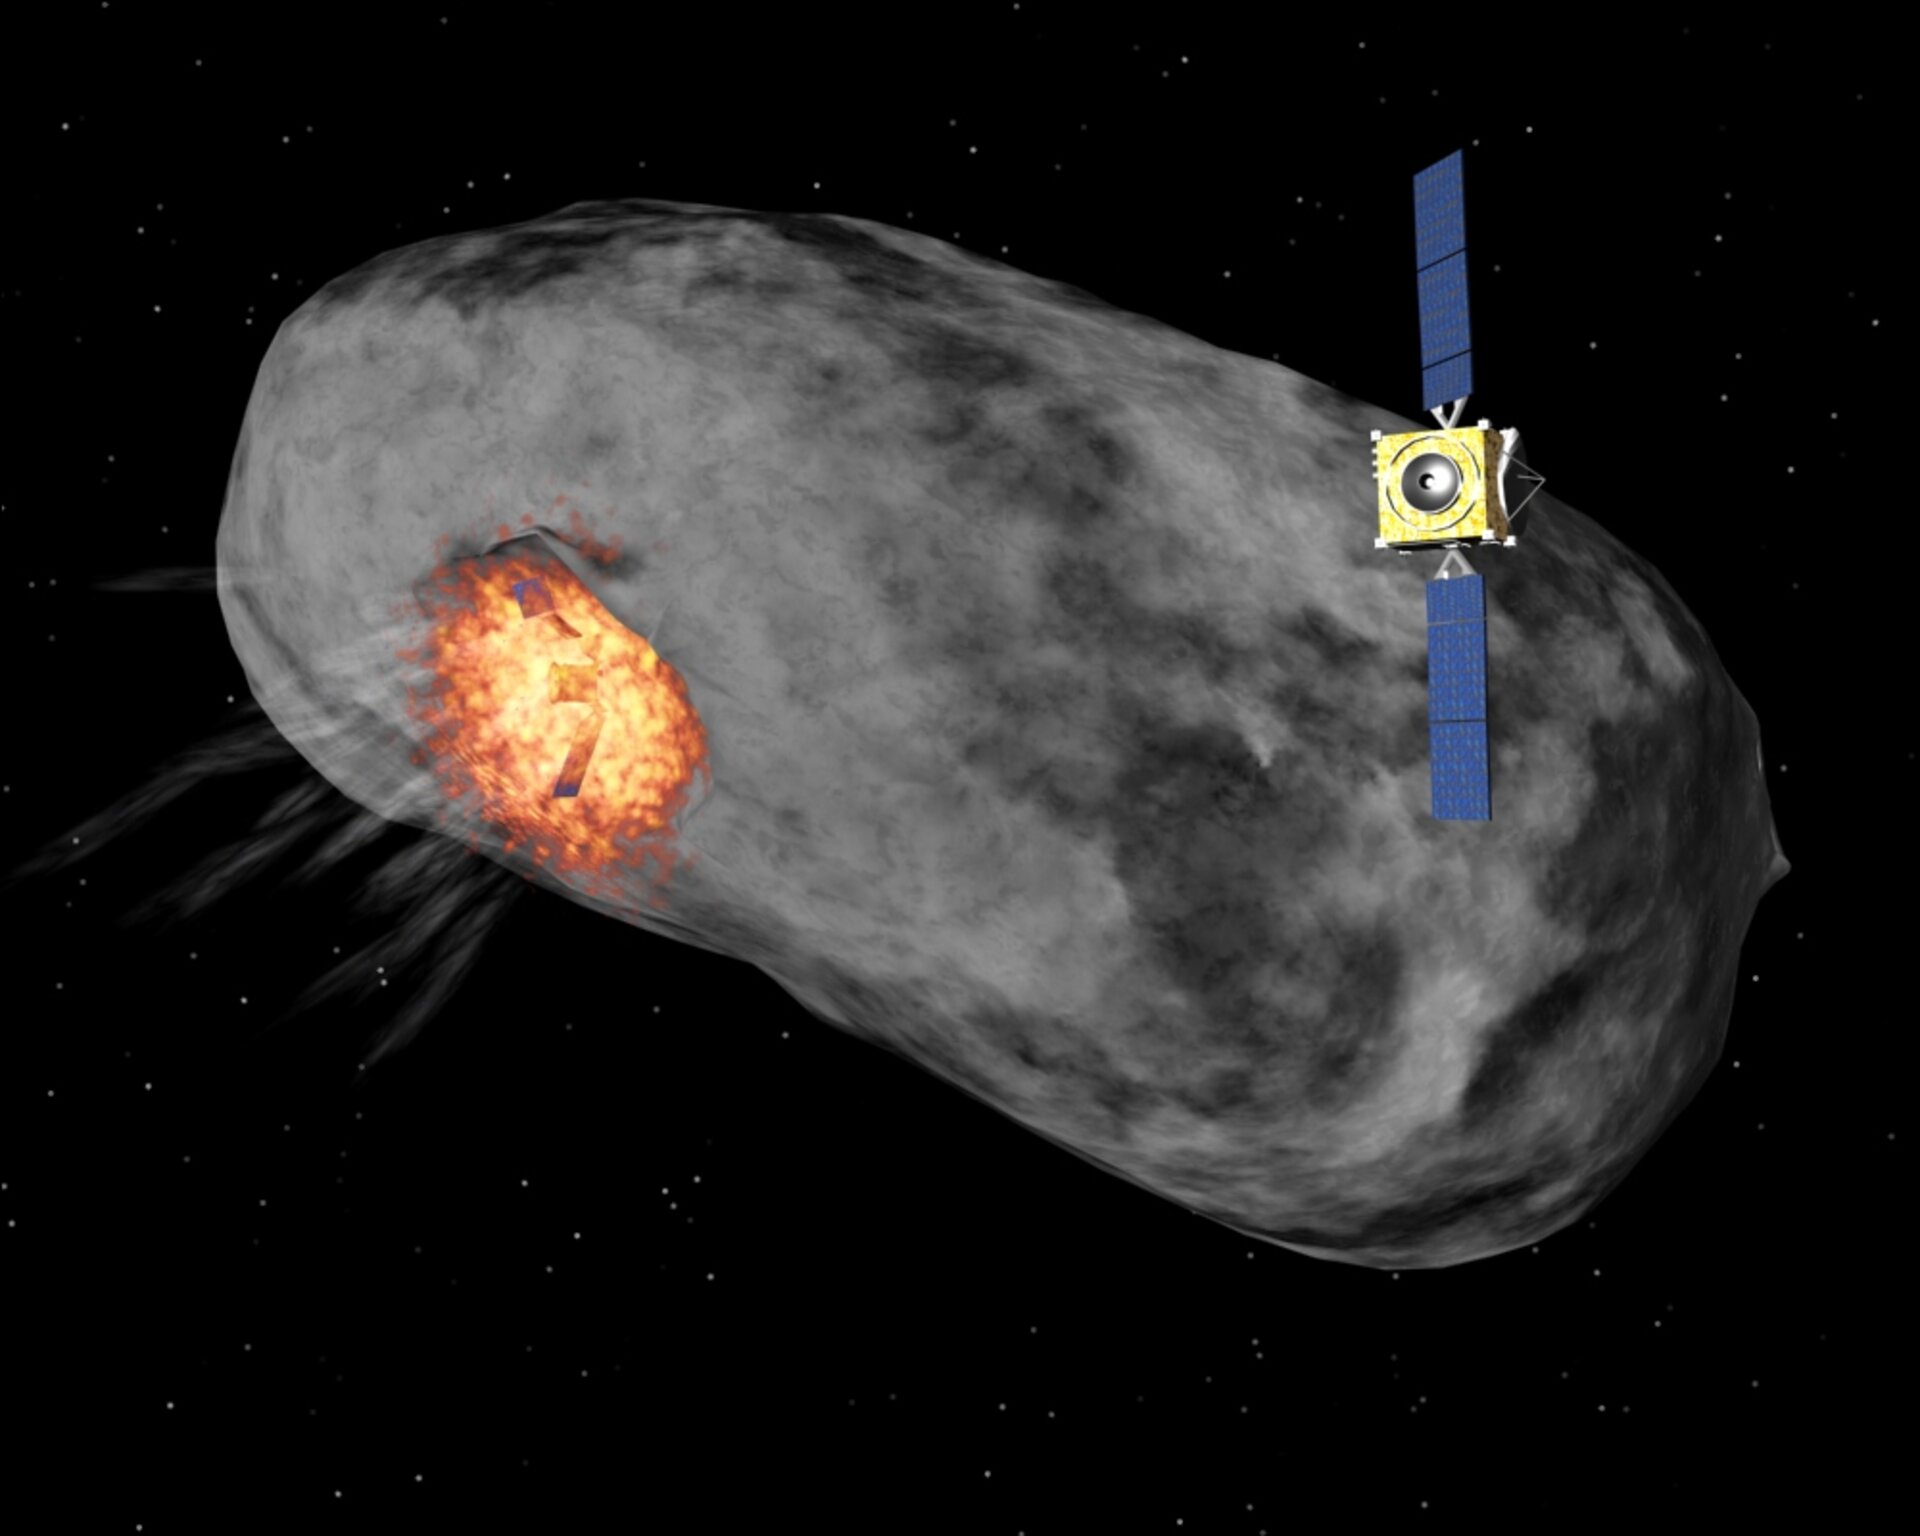 Hidalgo impacts with the asteroid